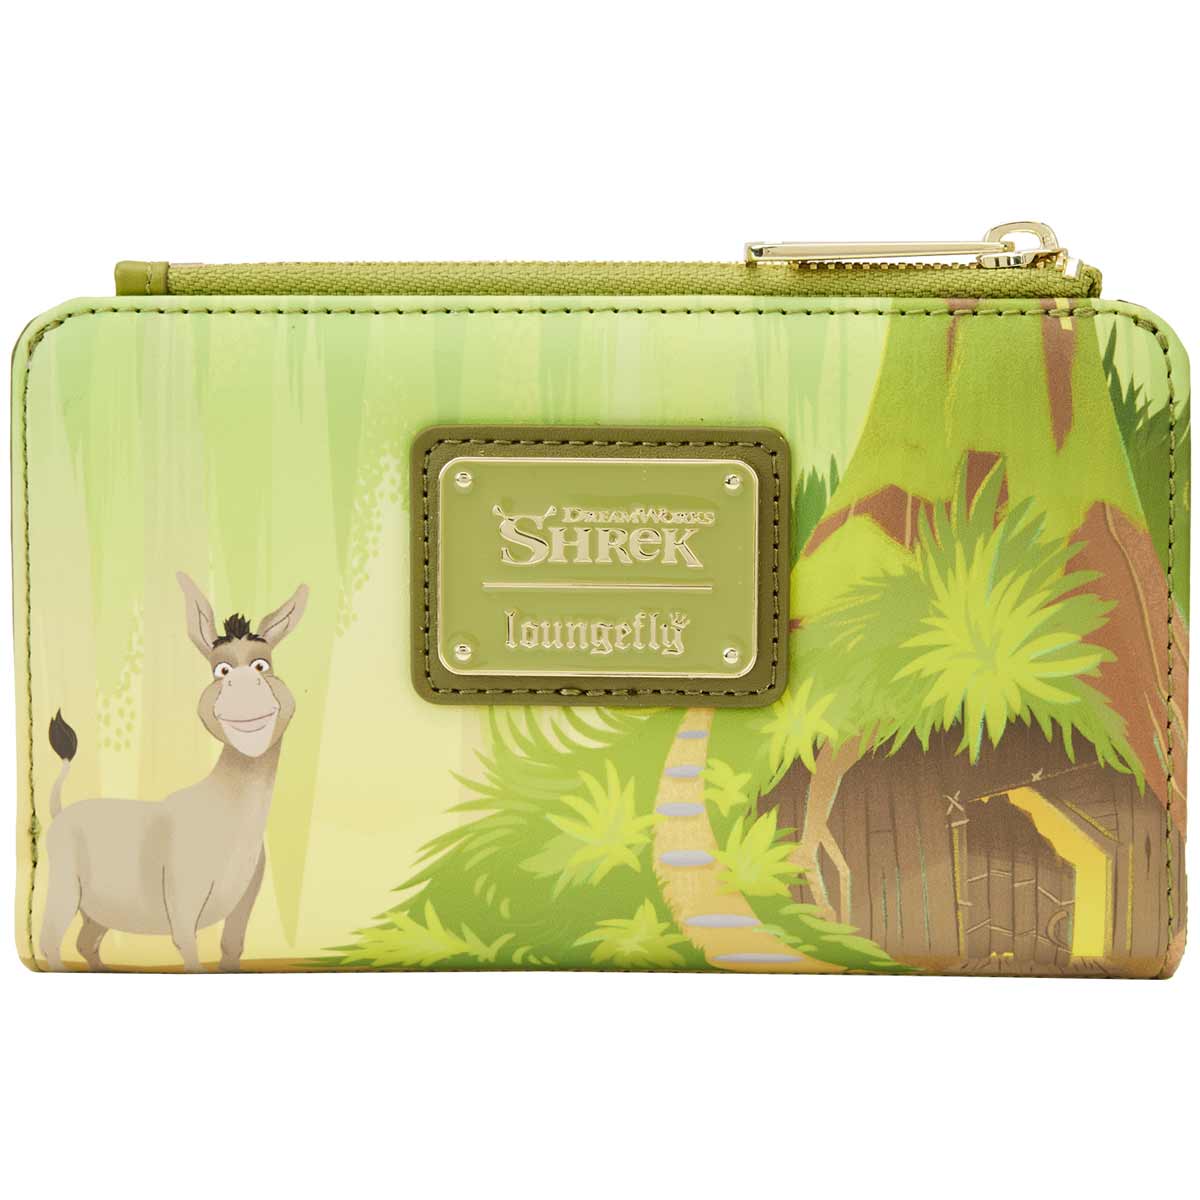 Loungefly x Dreamworks Shrek Happily Ever After Wallet - GeekCore